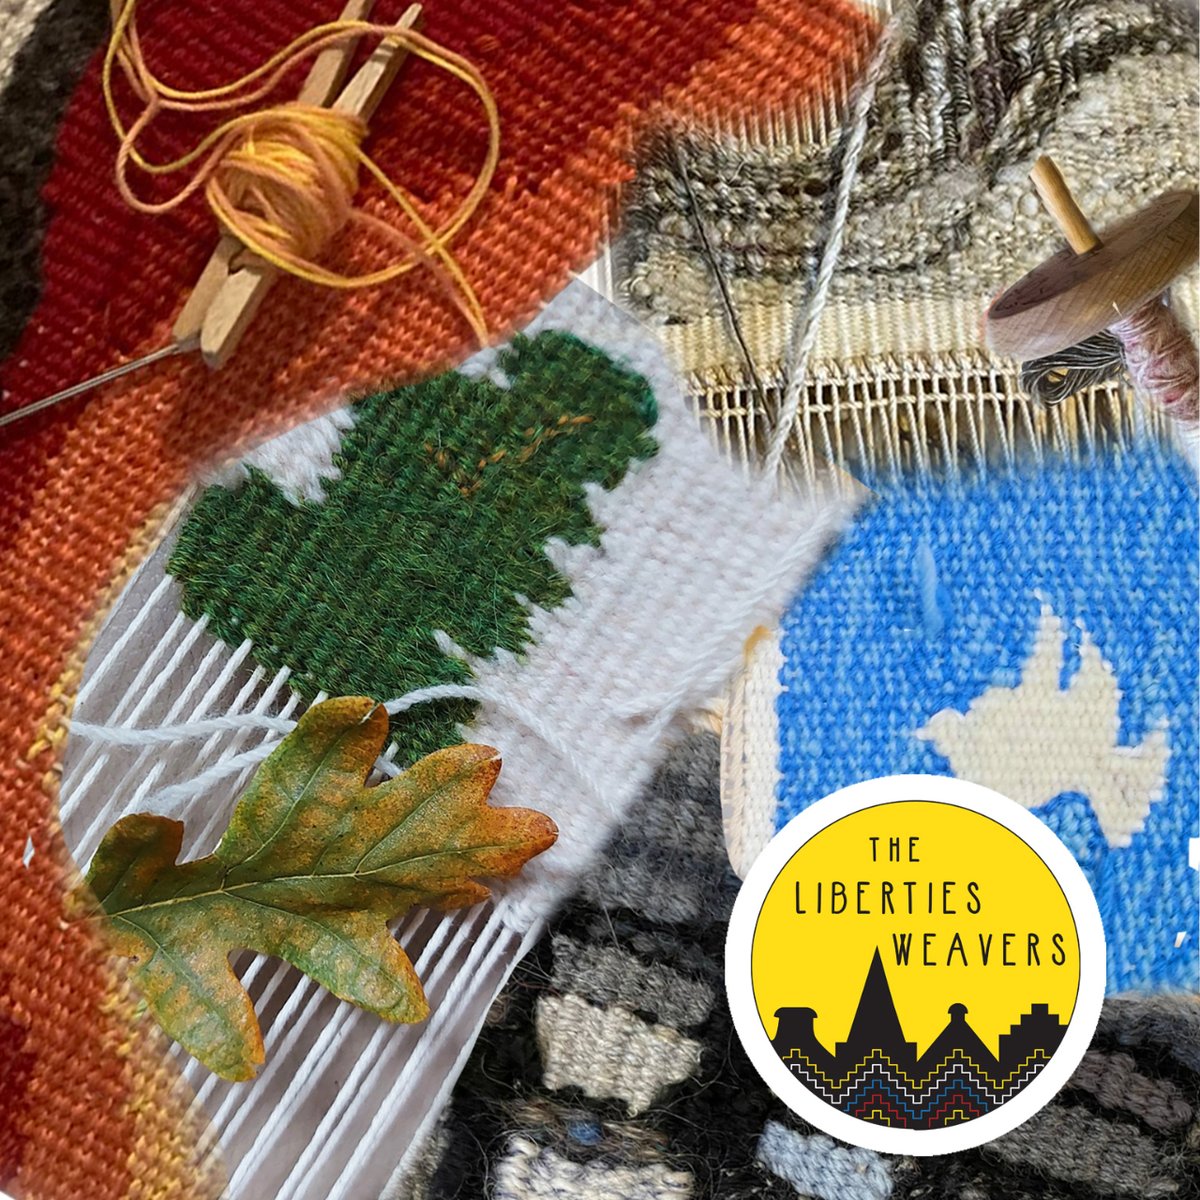 This Week! Brigid with The Liberties Weavers ~ Preview: 5–8pm Thursday 1st February Exhibition continues: Friday 2nd February Event: Workshop 'Weavetime with The Liberties Weavers' on Thursday 2–4pm. ~ @artscouncilireland @dublincitycouncil #BrigitDublin2024 #dublin